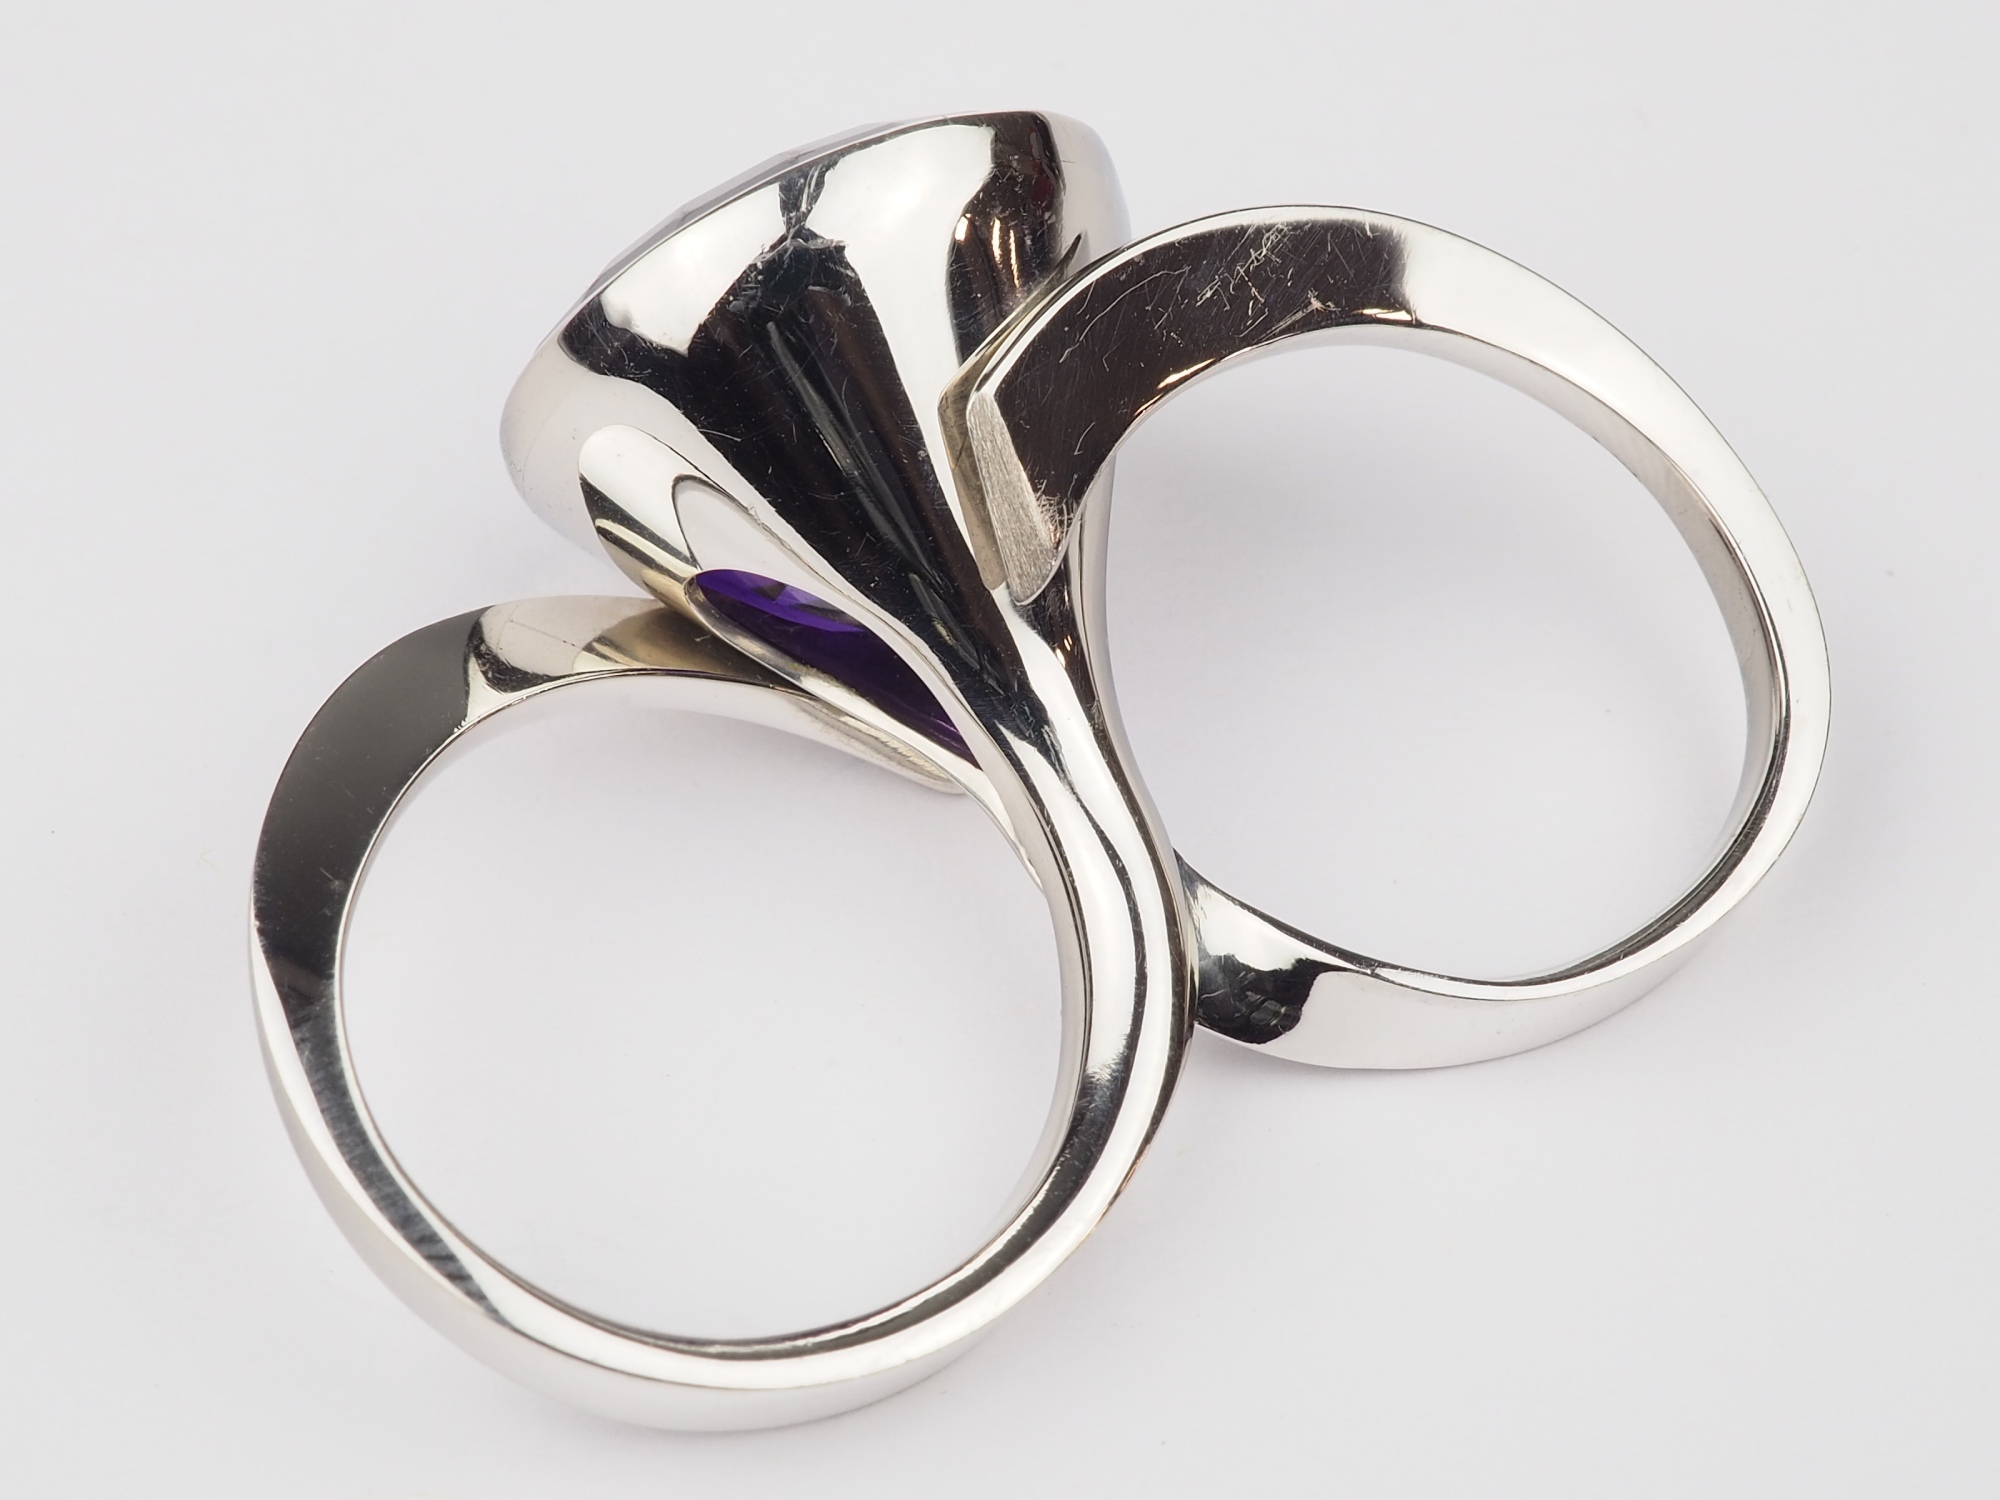 Ehinger-Schwarz platinum double ring with amethyst - Image 2 of 3